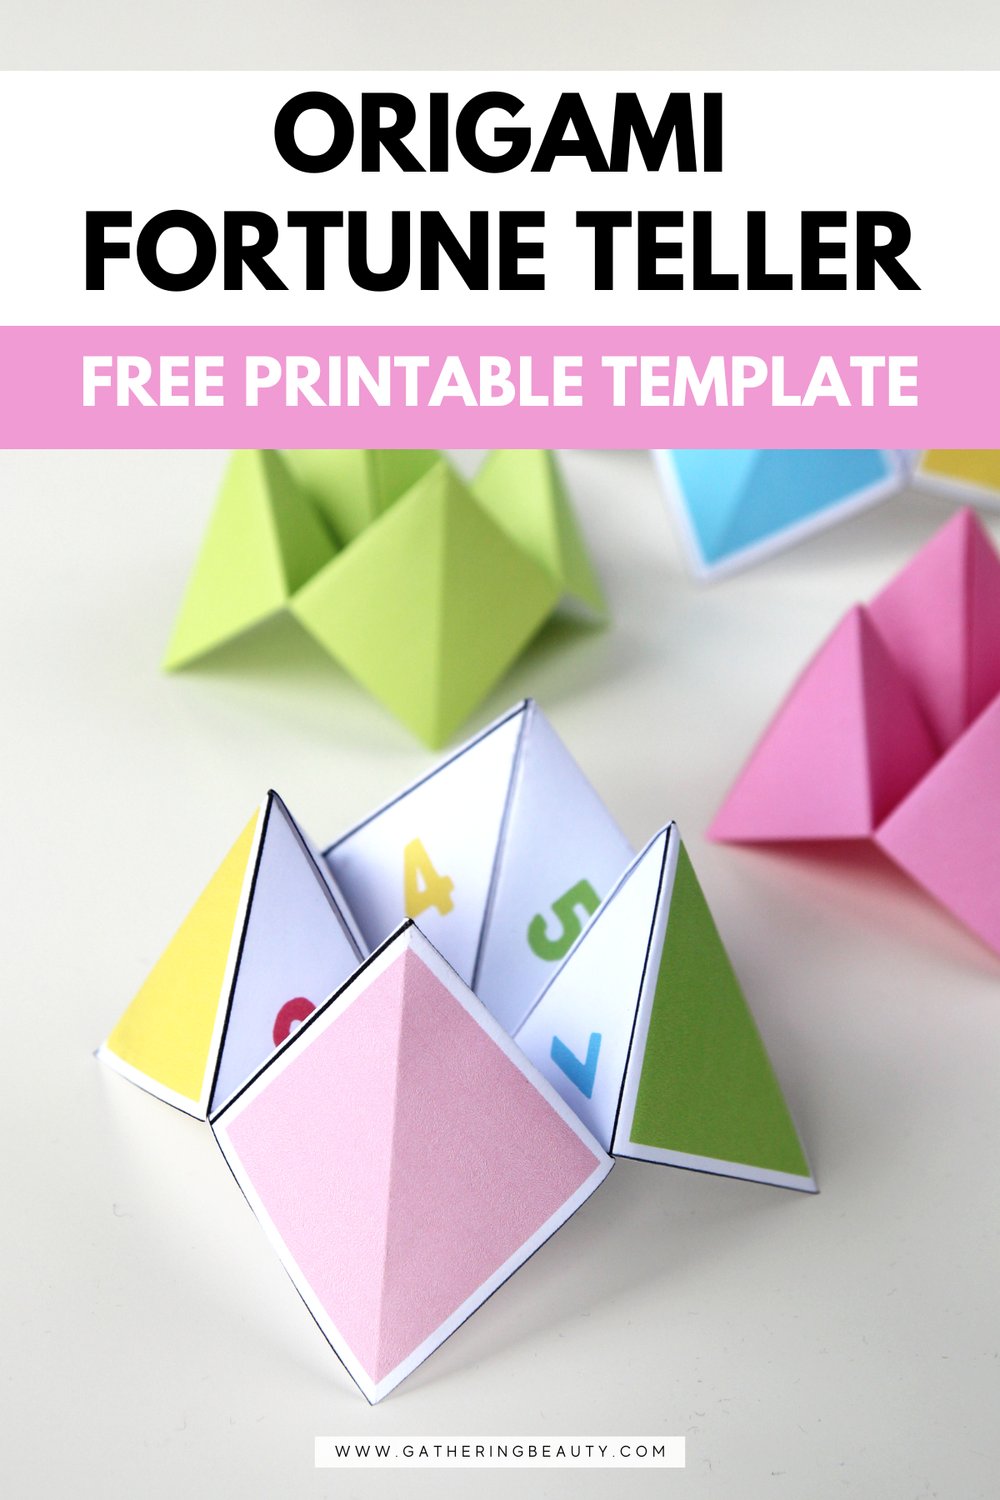 How to Make Fortune Cupcakes (Free Printable!)